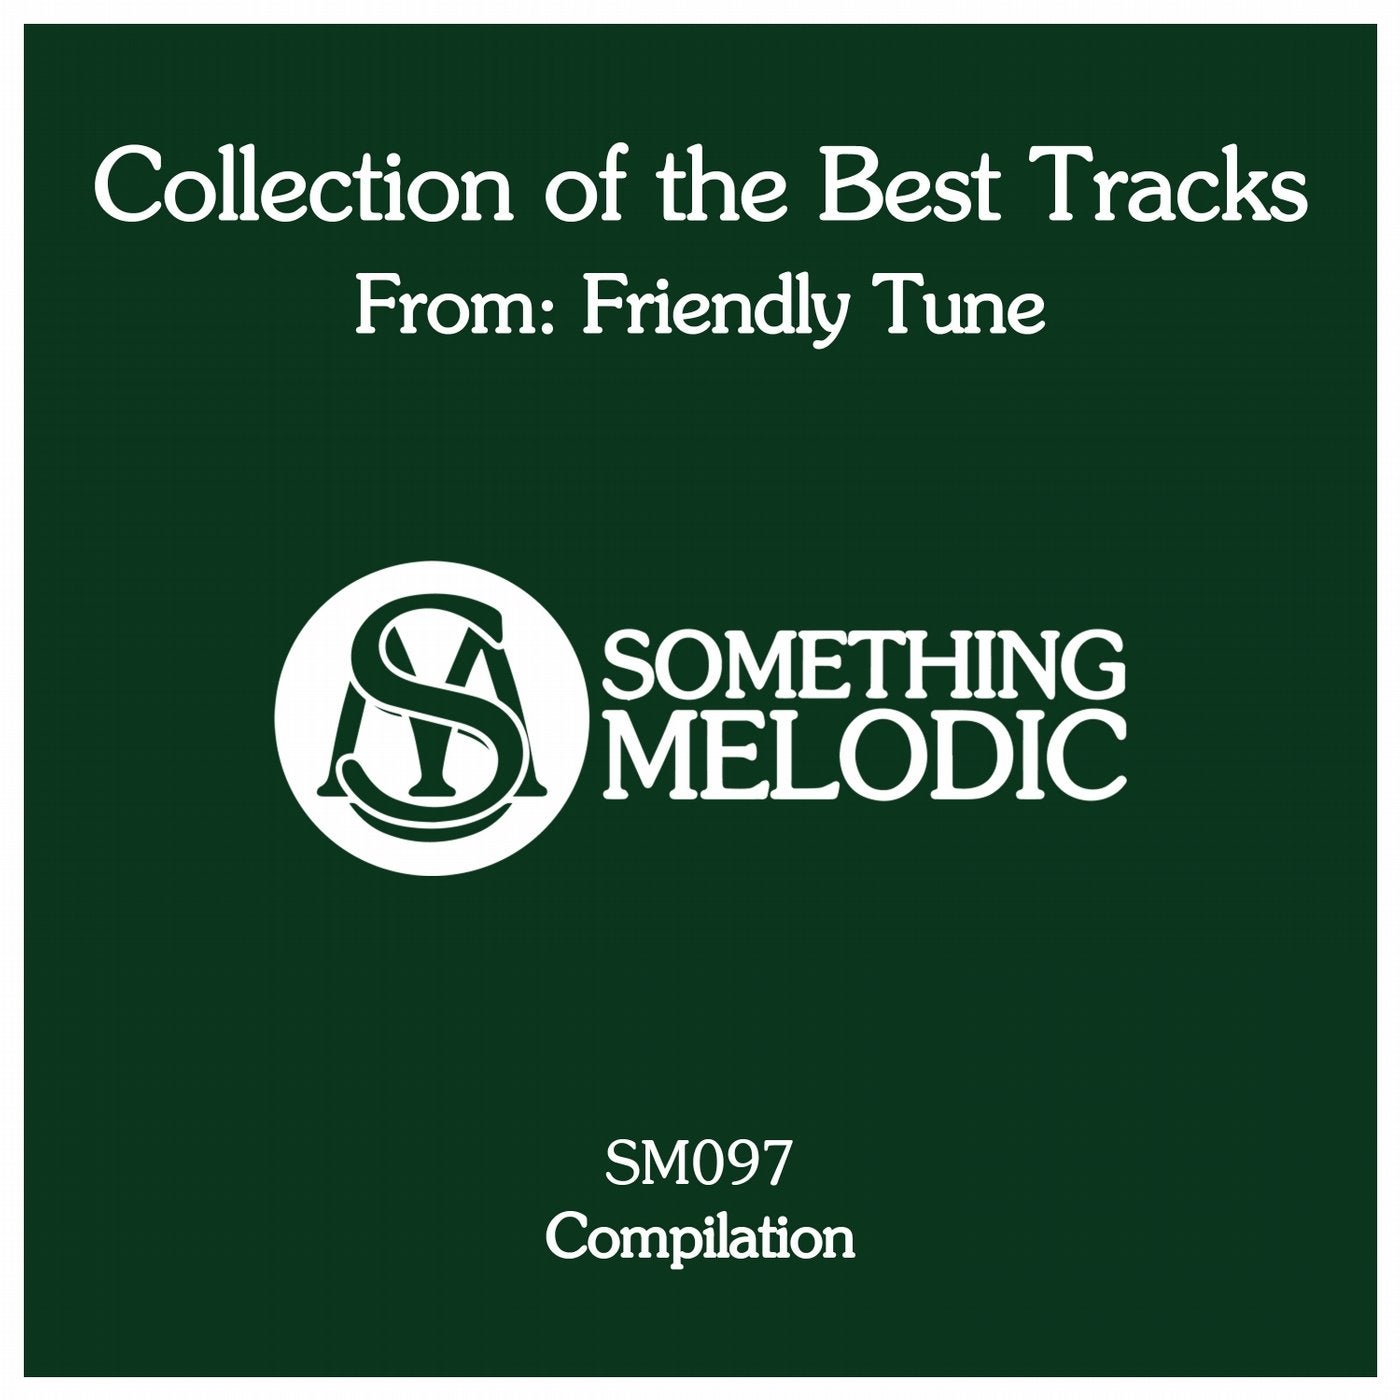 Collection of the Best Tracks From: Friendly Tune